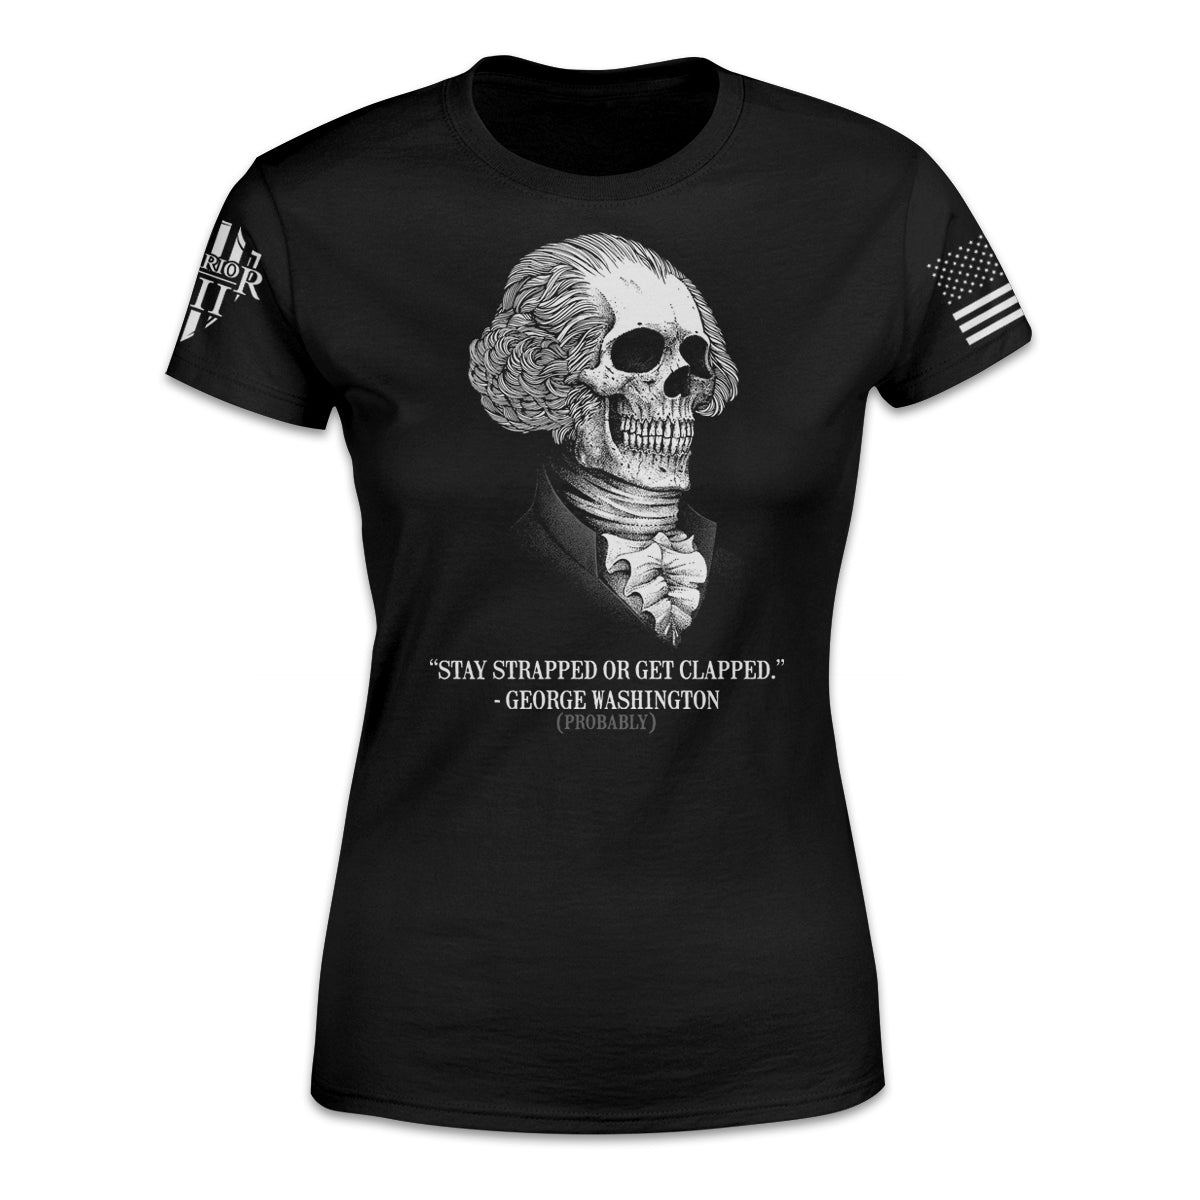 A black women's relaxed fit shirt with the words "Stay strapped, or get clapped." - George Washington (probably)" and a George Washington skull.